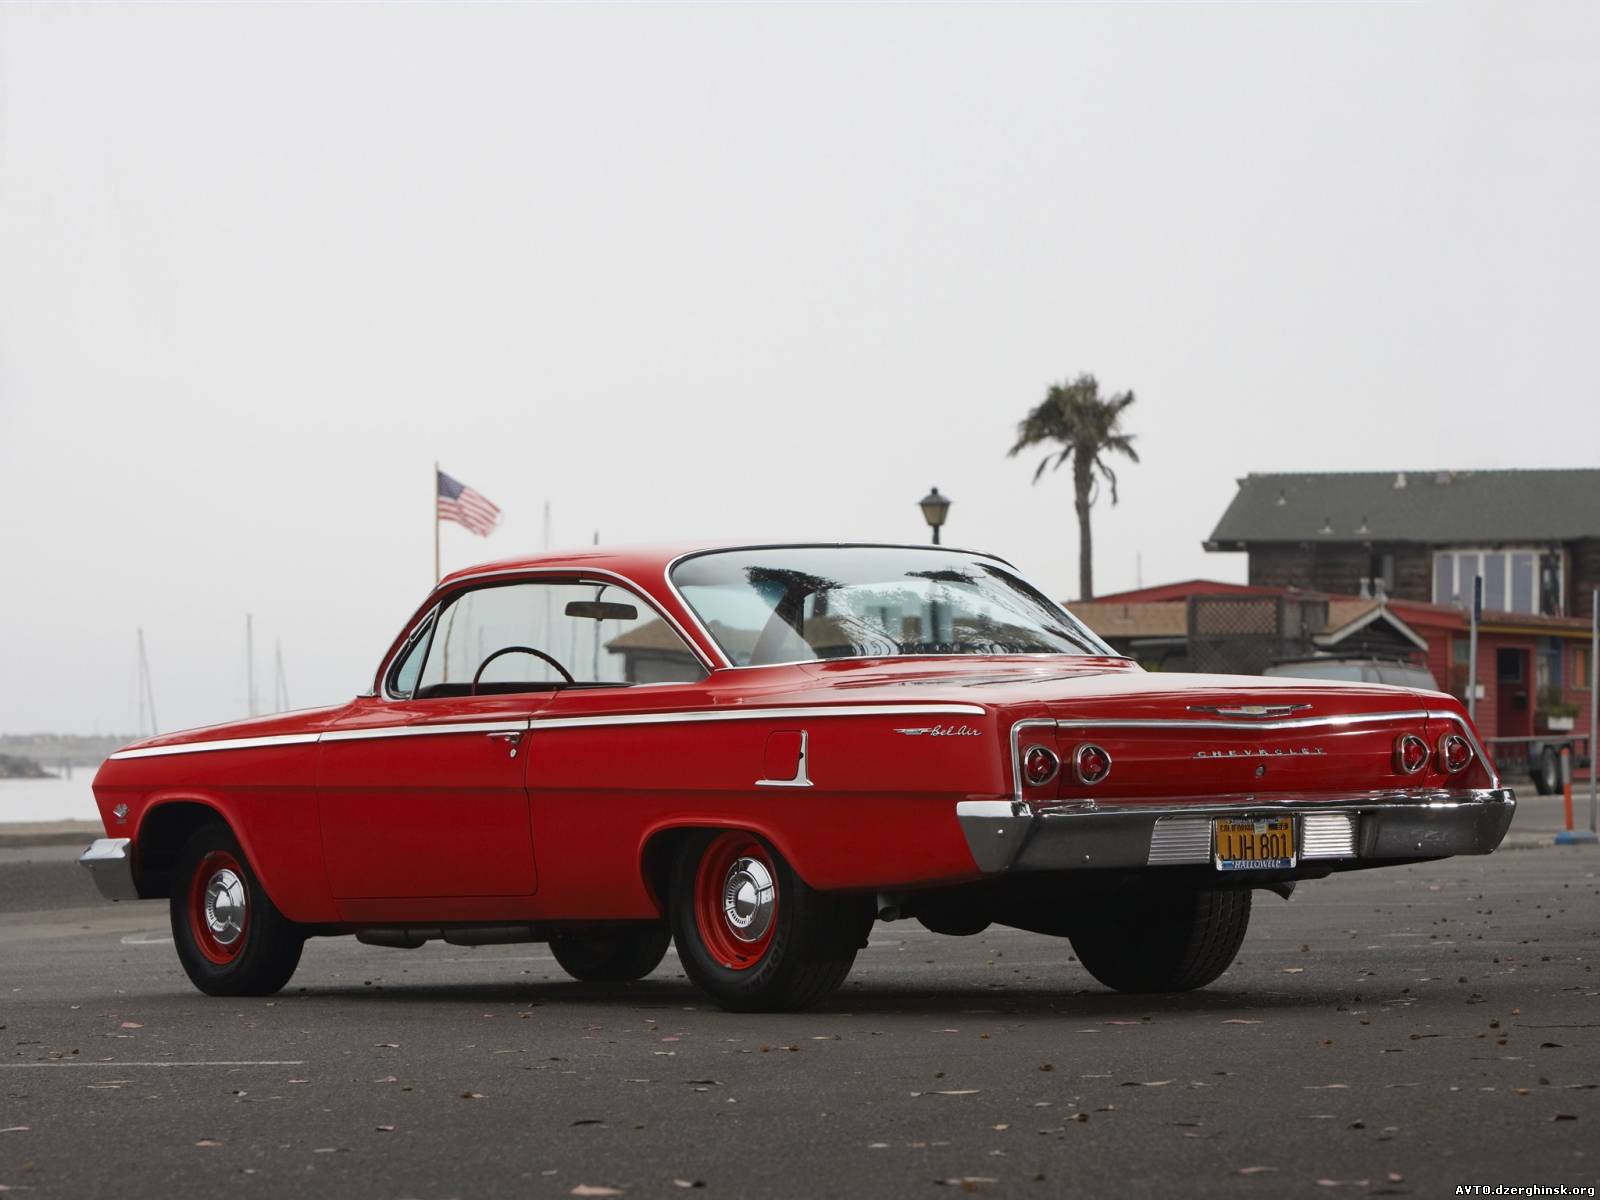 096. Chevrolet Bel Air Sport Coupe 1962